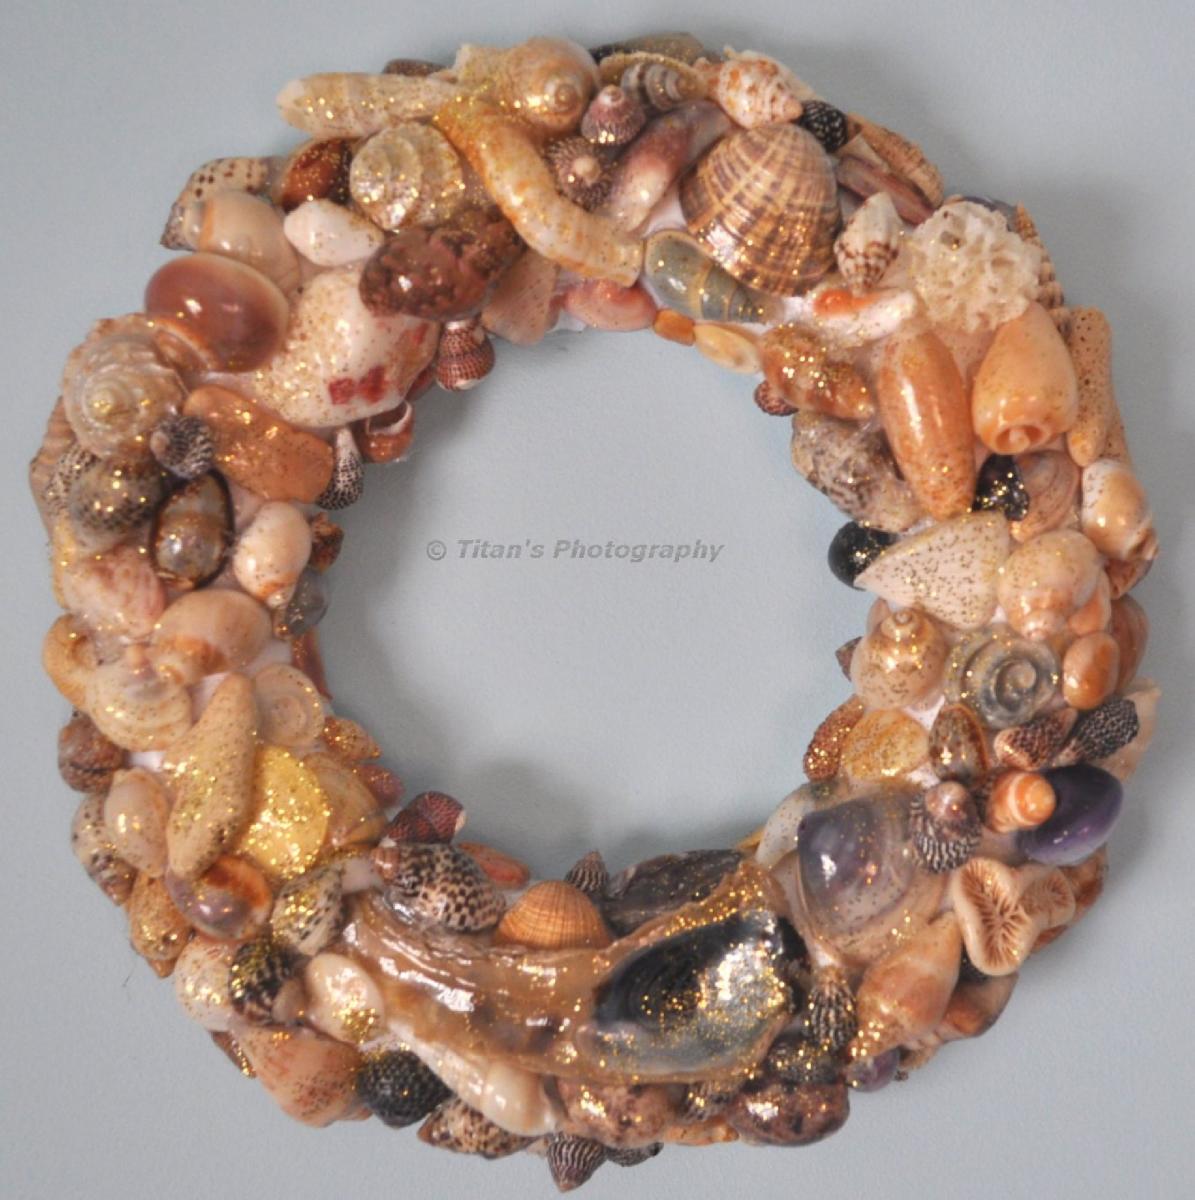 How to Decorate Wreaths and Photo Frames with Seashells